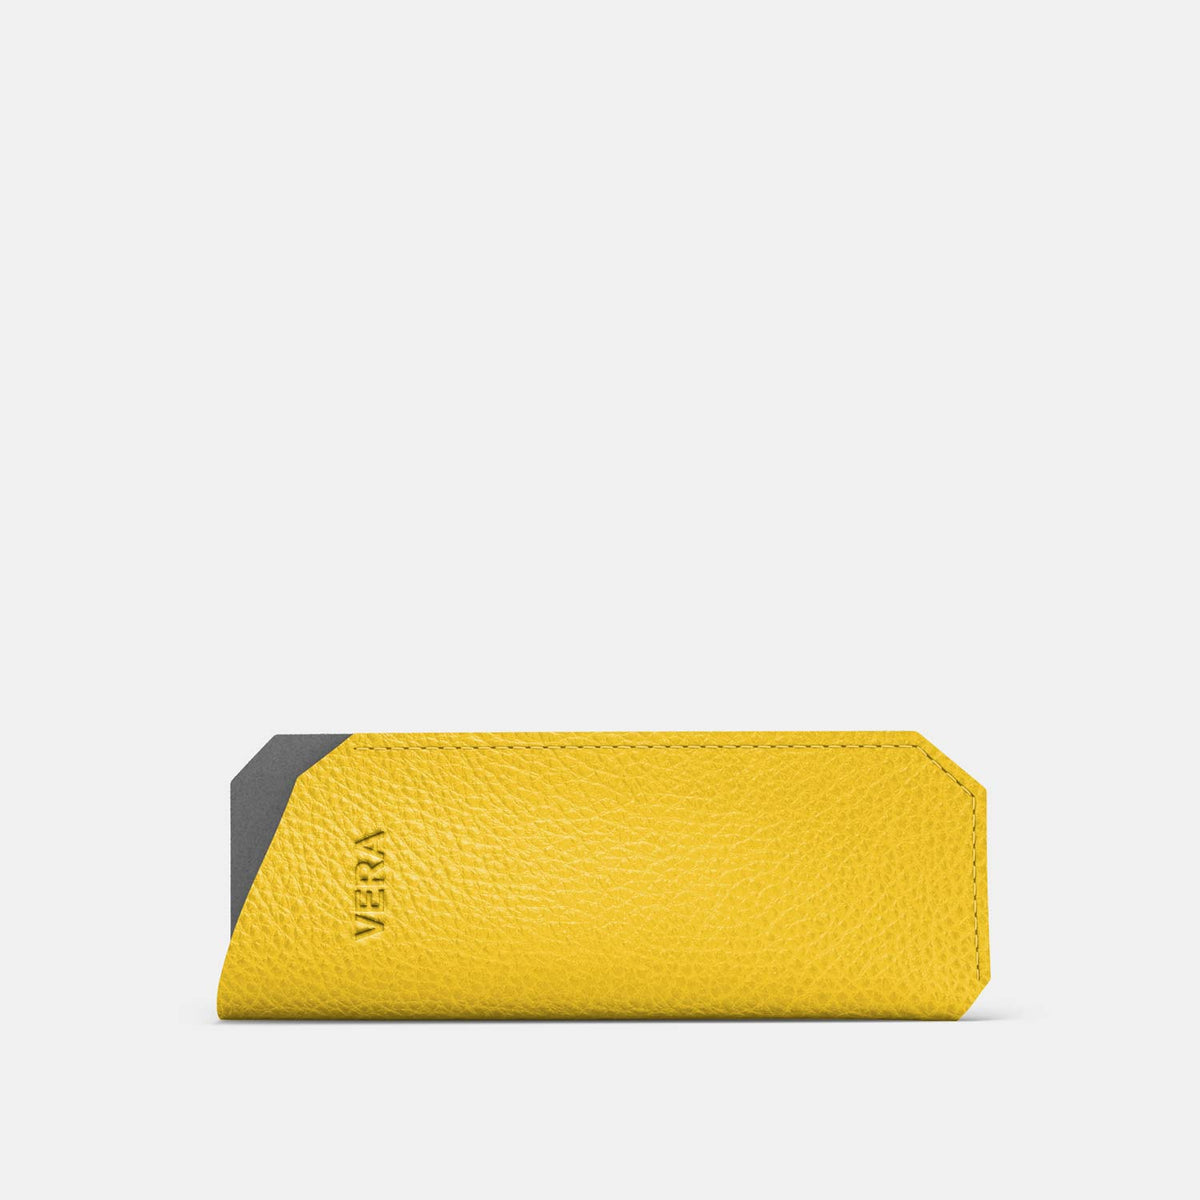 Leather Glasses case - Yellow and Grey